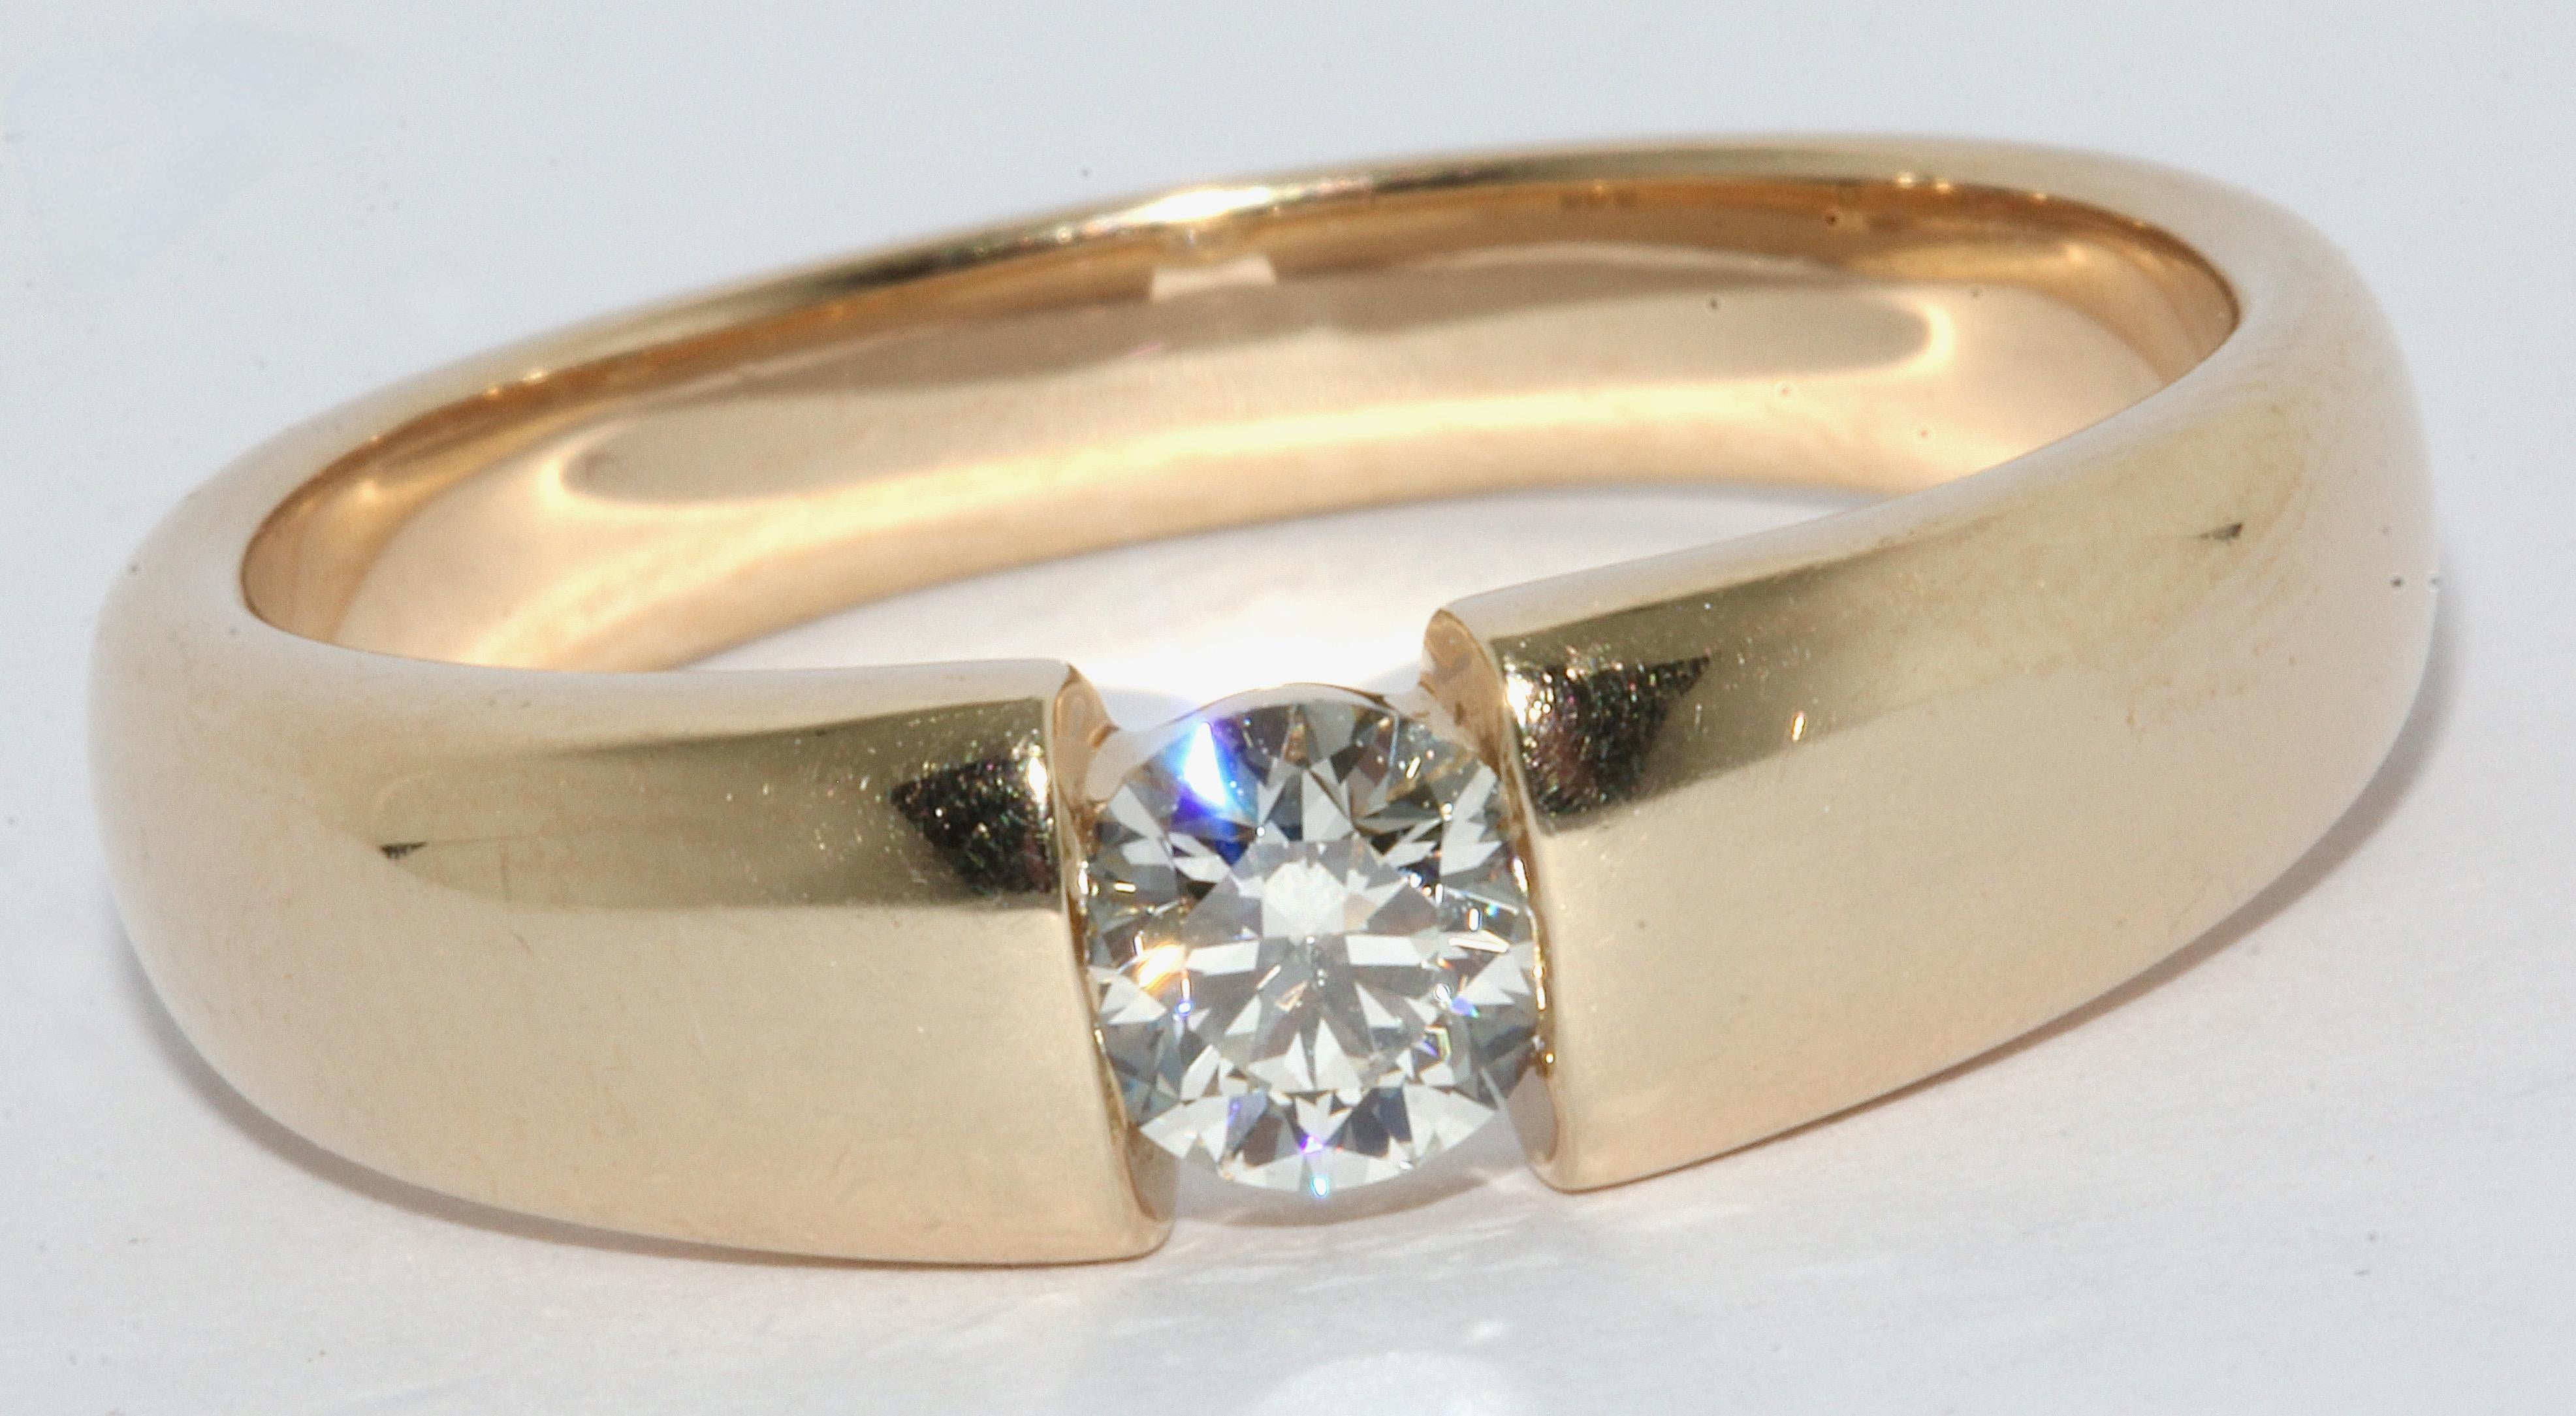 14 Karat Yellow Gold Tension Ring set with 0.415 Carat White Diamond

Clarity: VVS1
Color: I
Cut: very good
Carat: 0.415

Including certificate of authenticity
